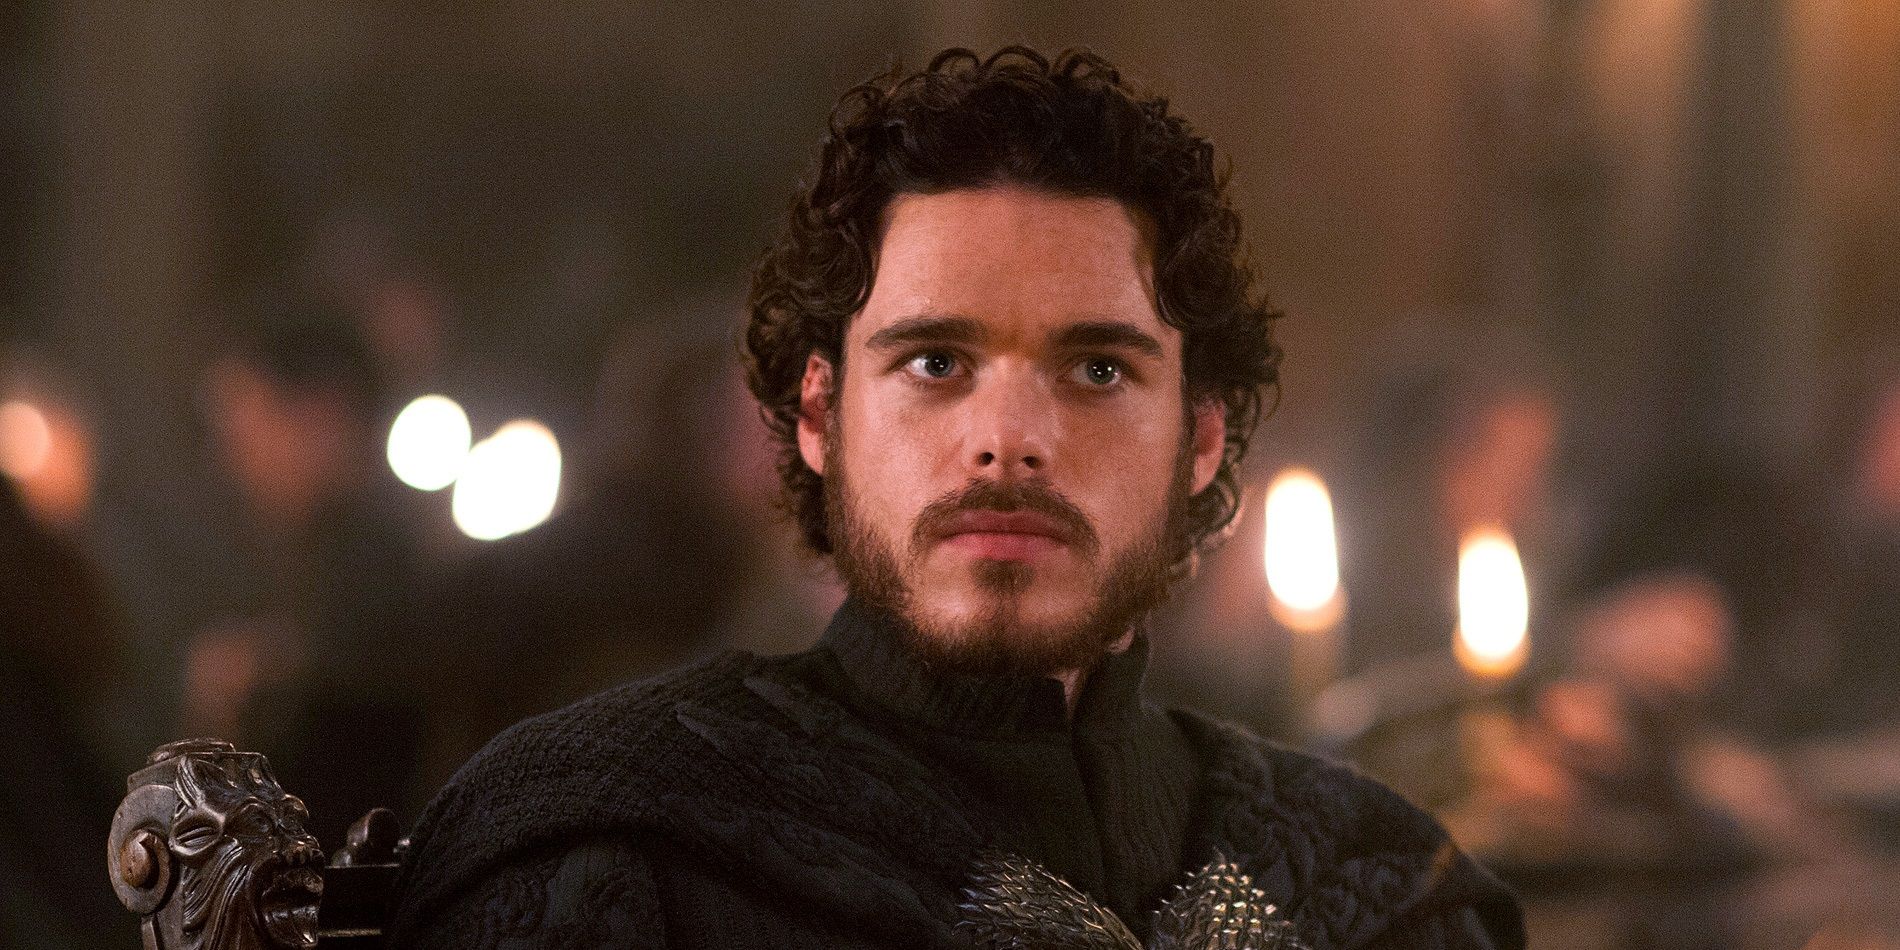 Robb Stark looking intently while in a room full of people in Game of Thrones.